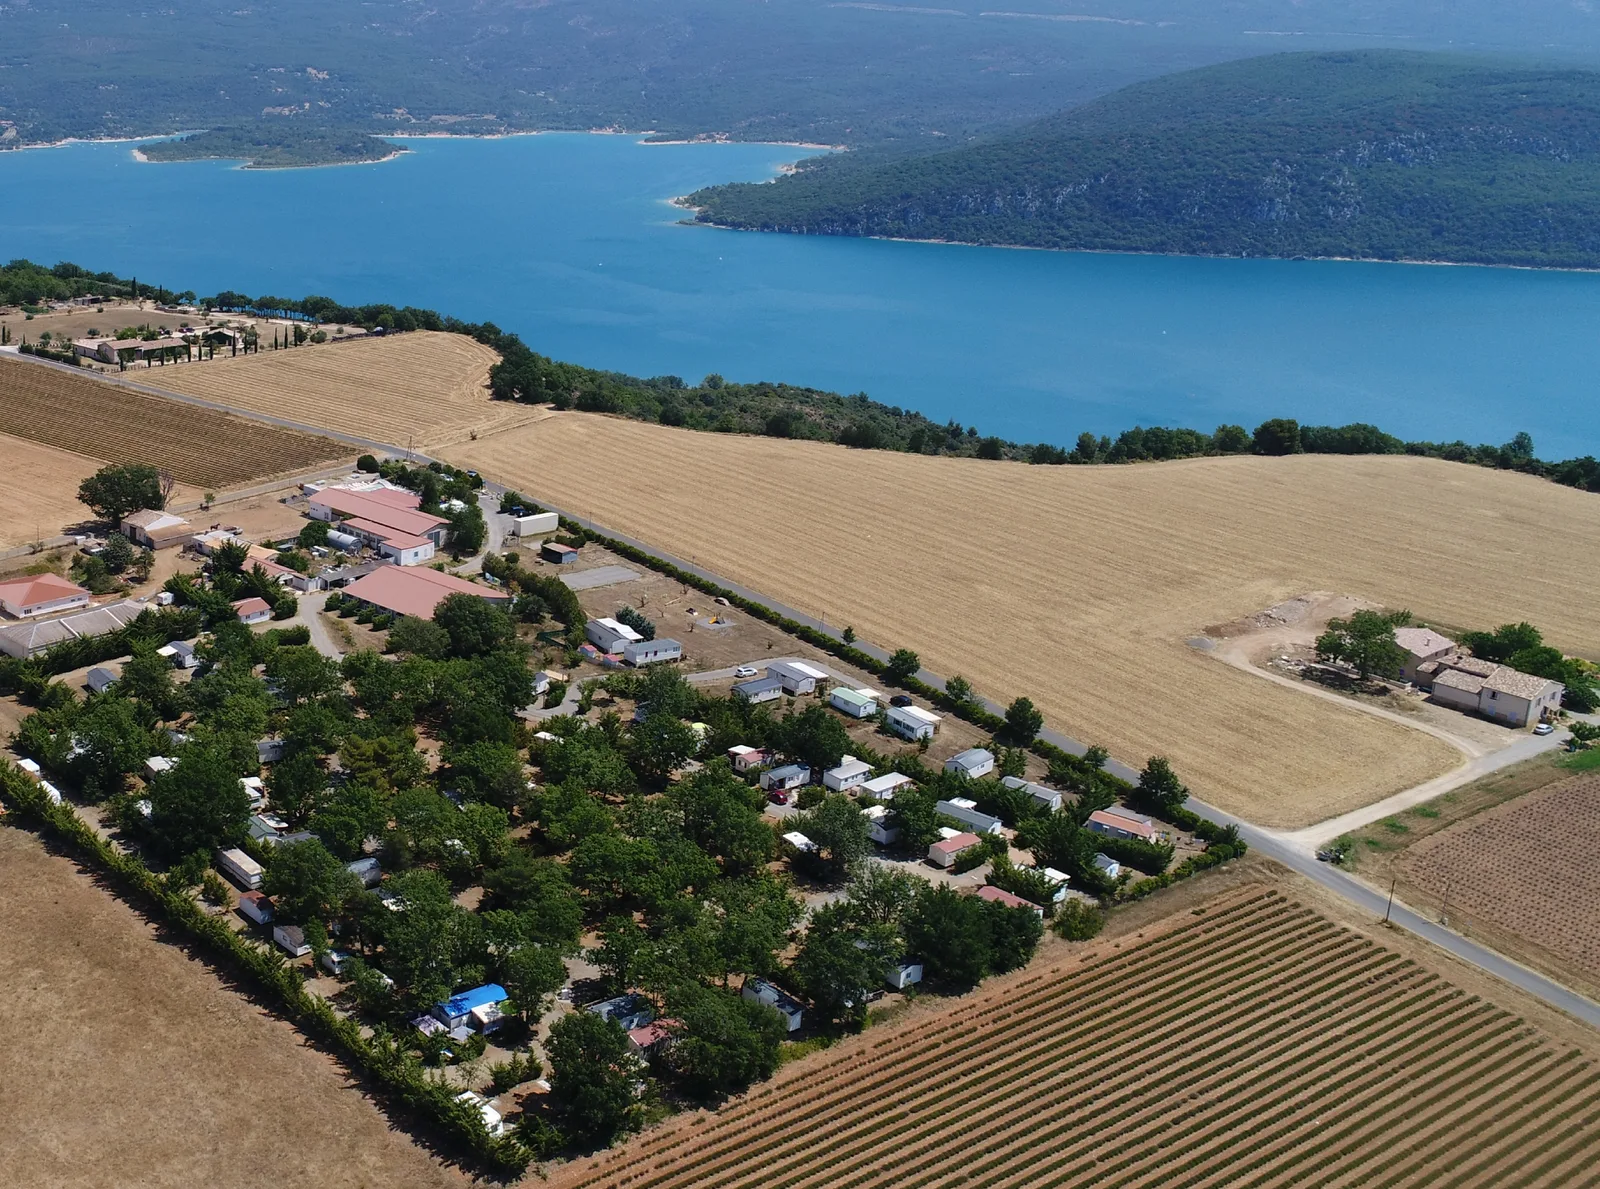 Mobils Diffusion - Plot of land for mobile home in a campsite in the Gorges du Verdon